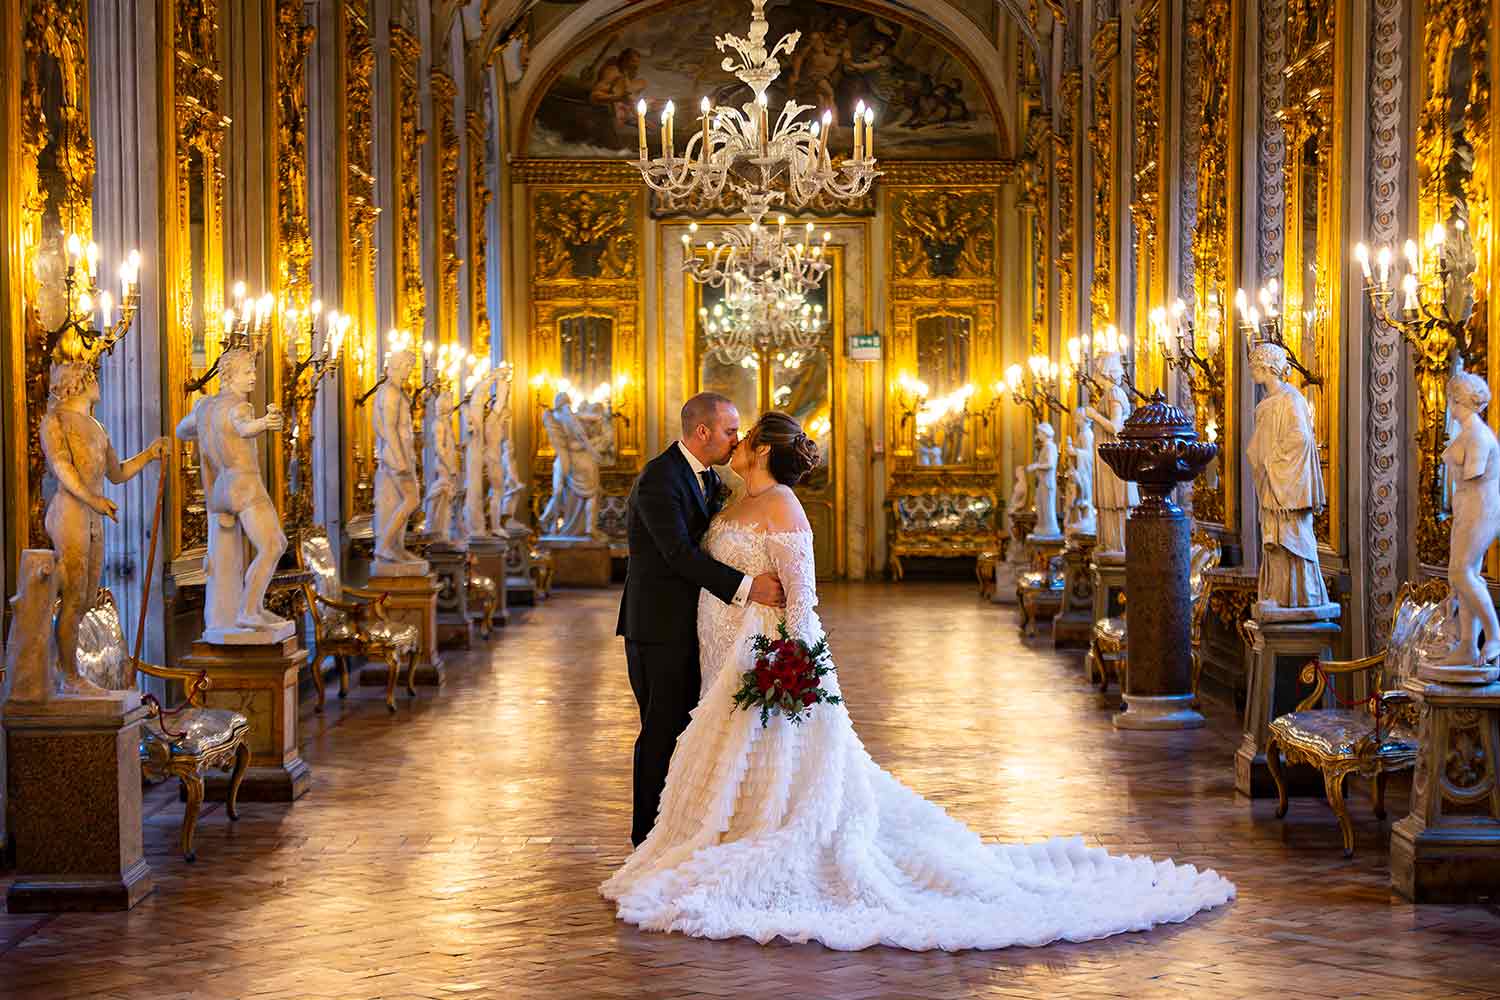 Wedding photography taken in Galleria Doria Pamphilj by our professional photographer in Rome Italy